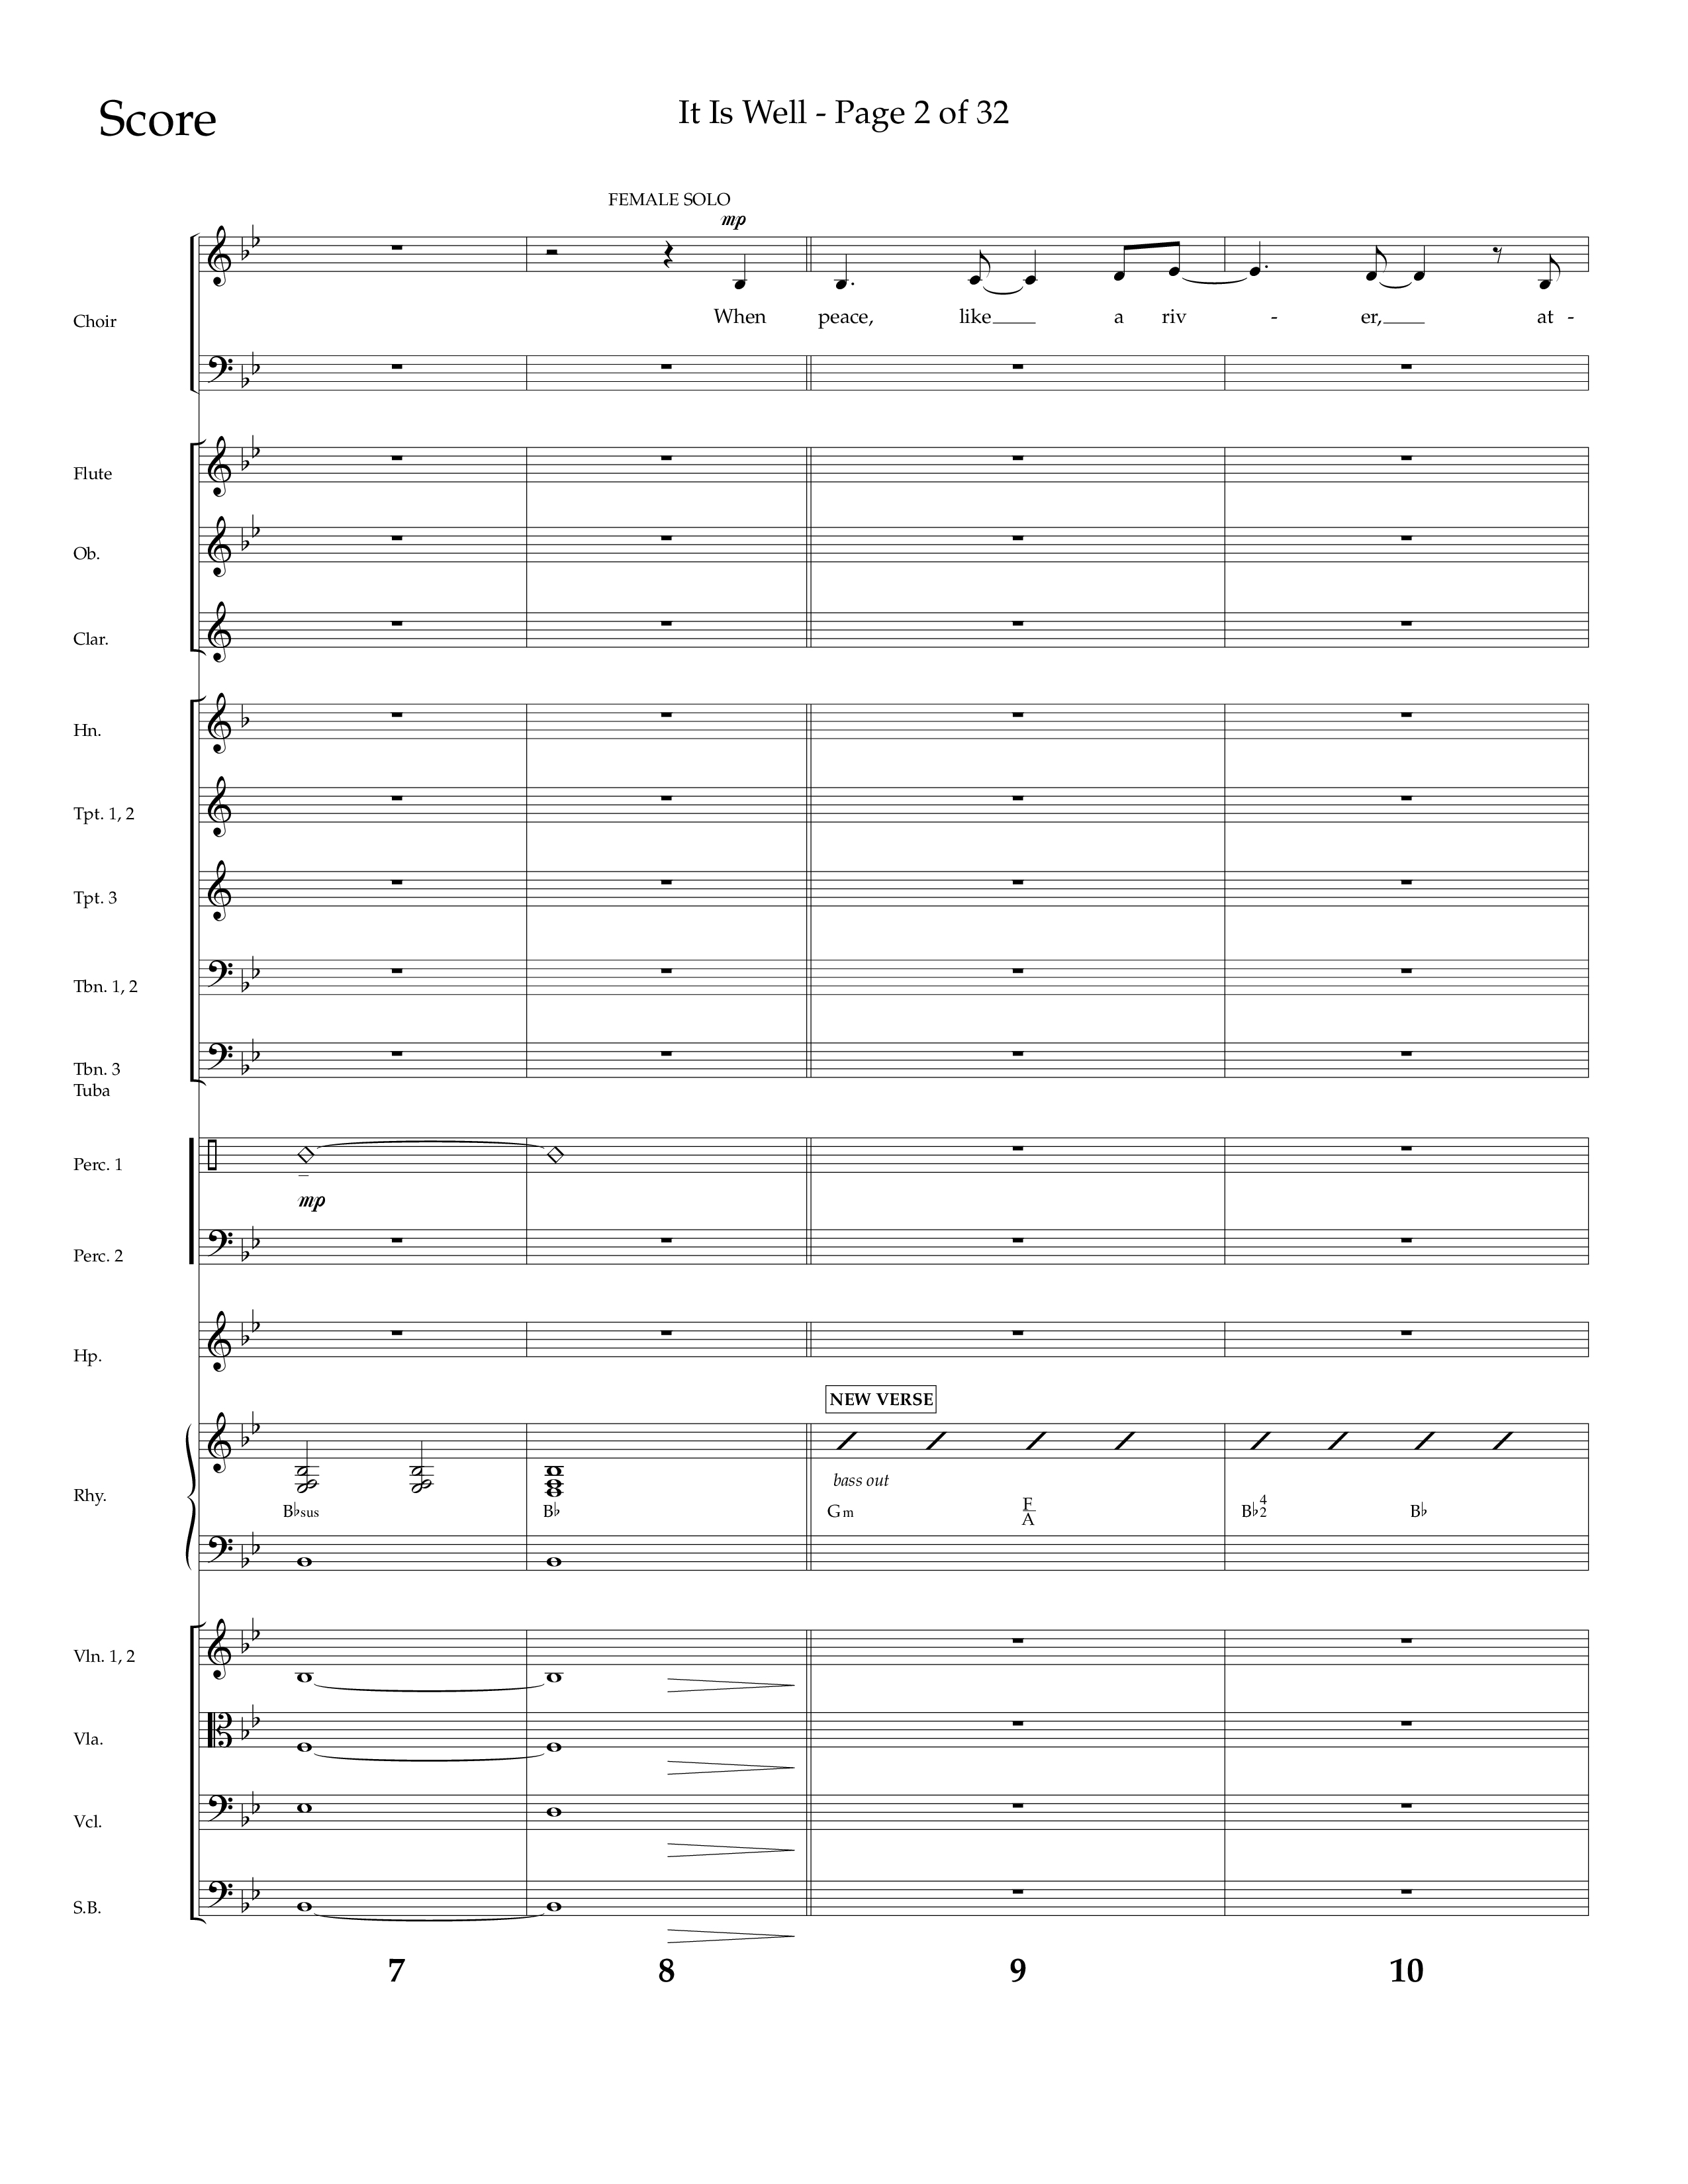 It Is Well (Choral Anthem SATB) Conductor's Score (Lifeway Choral / Arr. Cliff Duren)